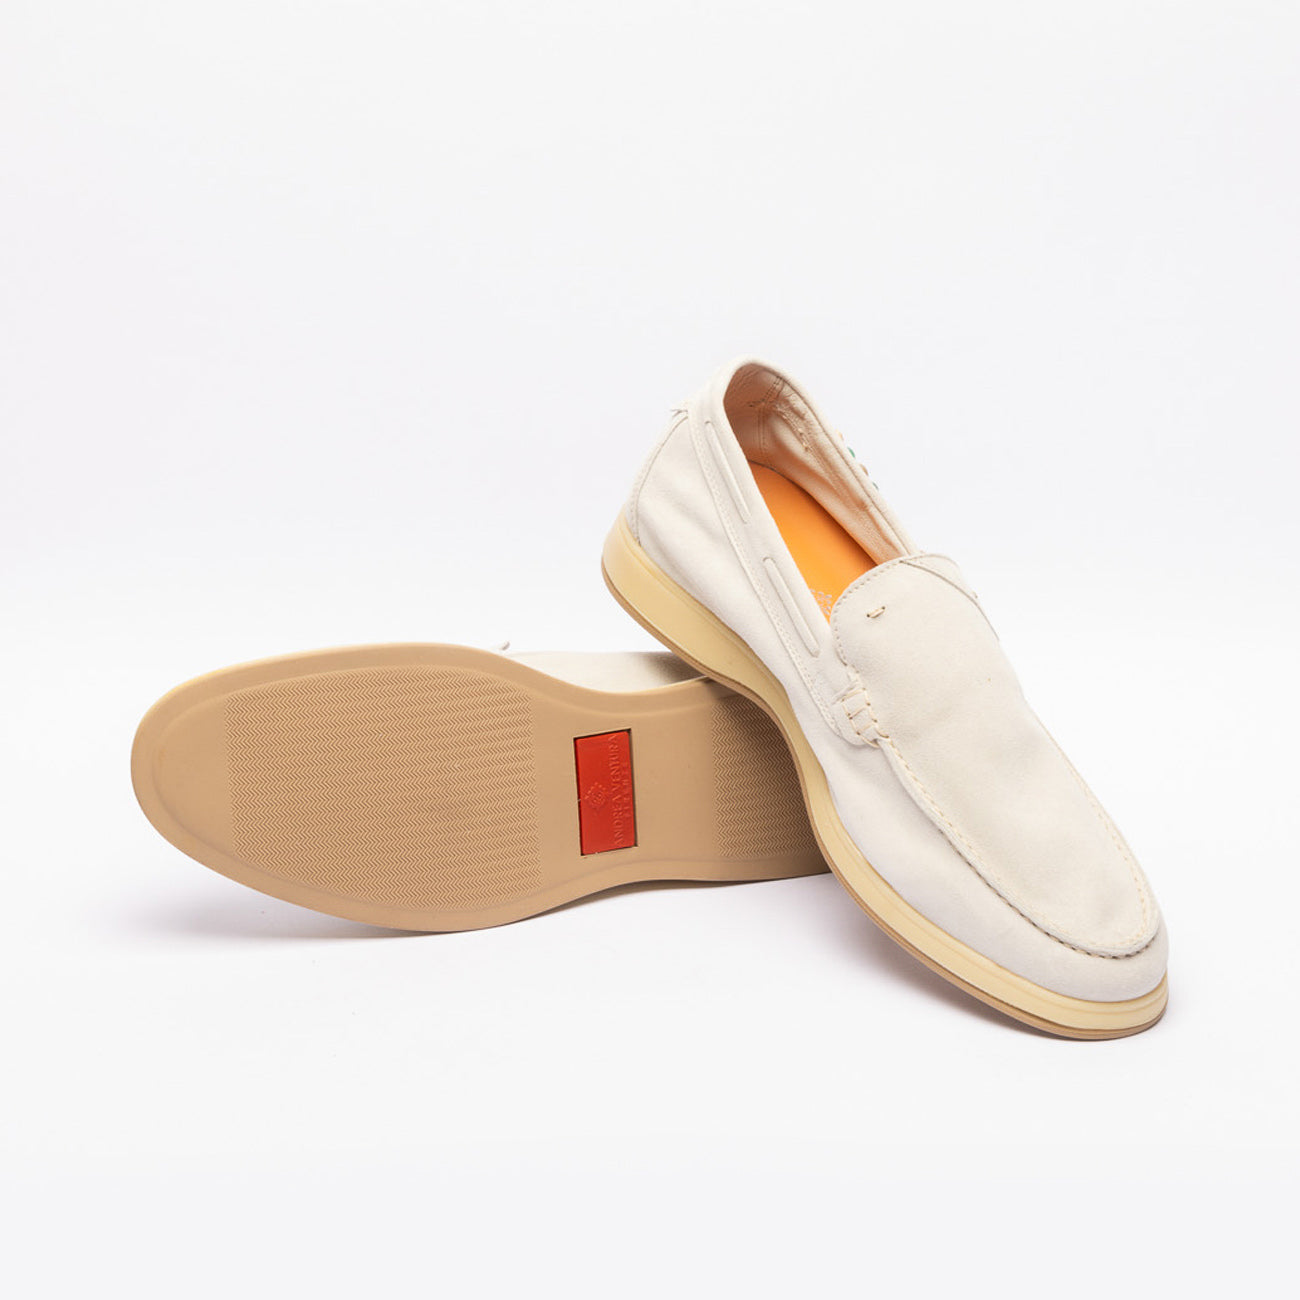 A. Ventura Aquariva Pearl slip-on ivory suede loafer